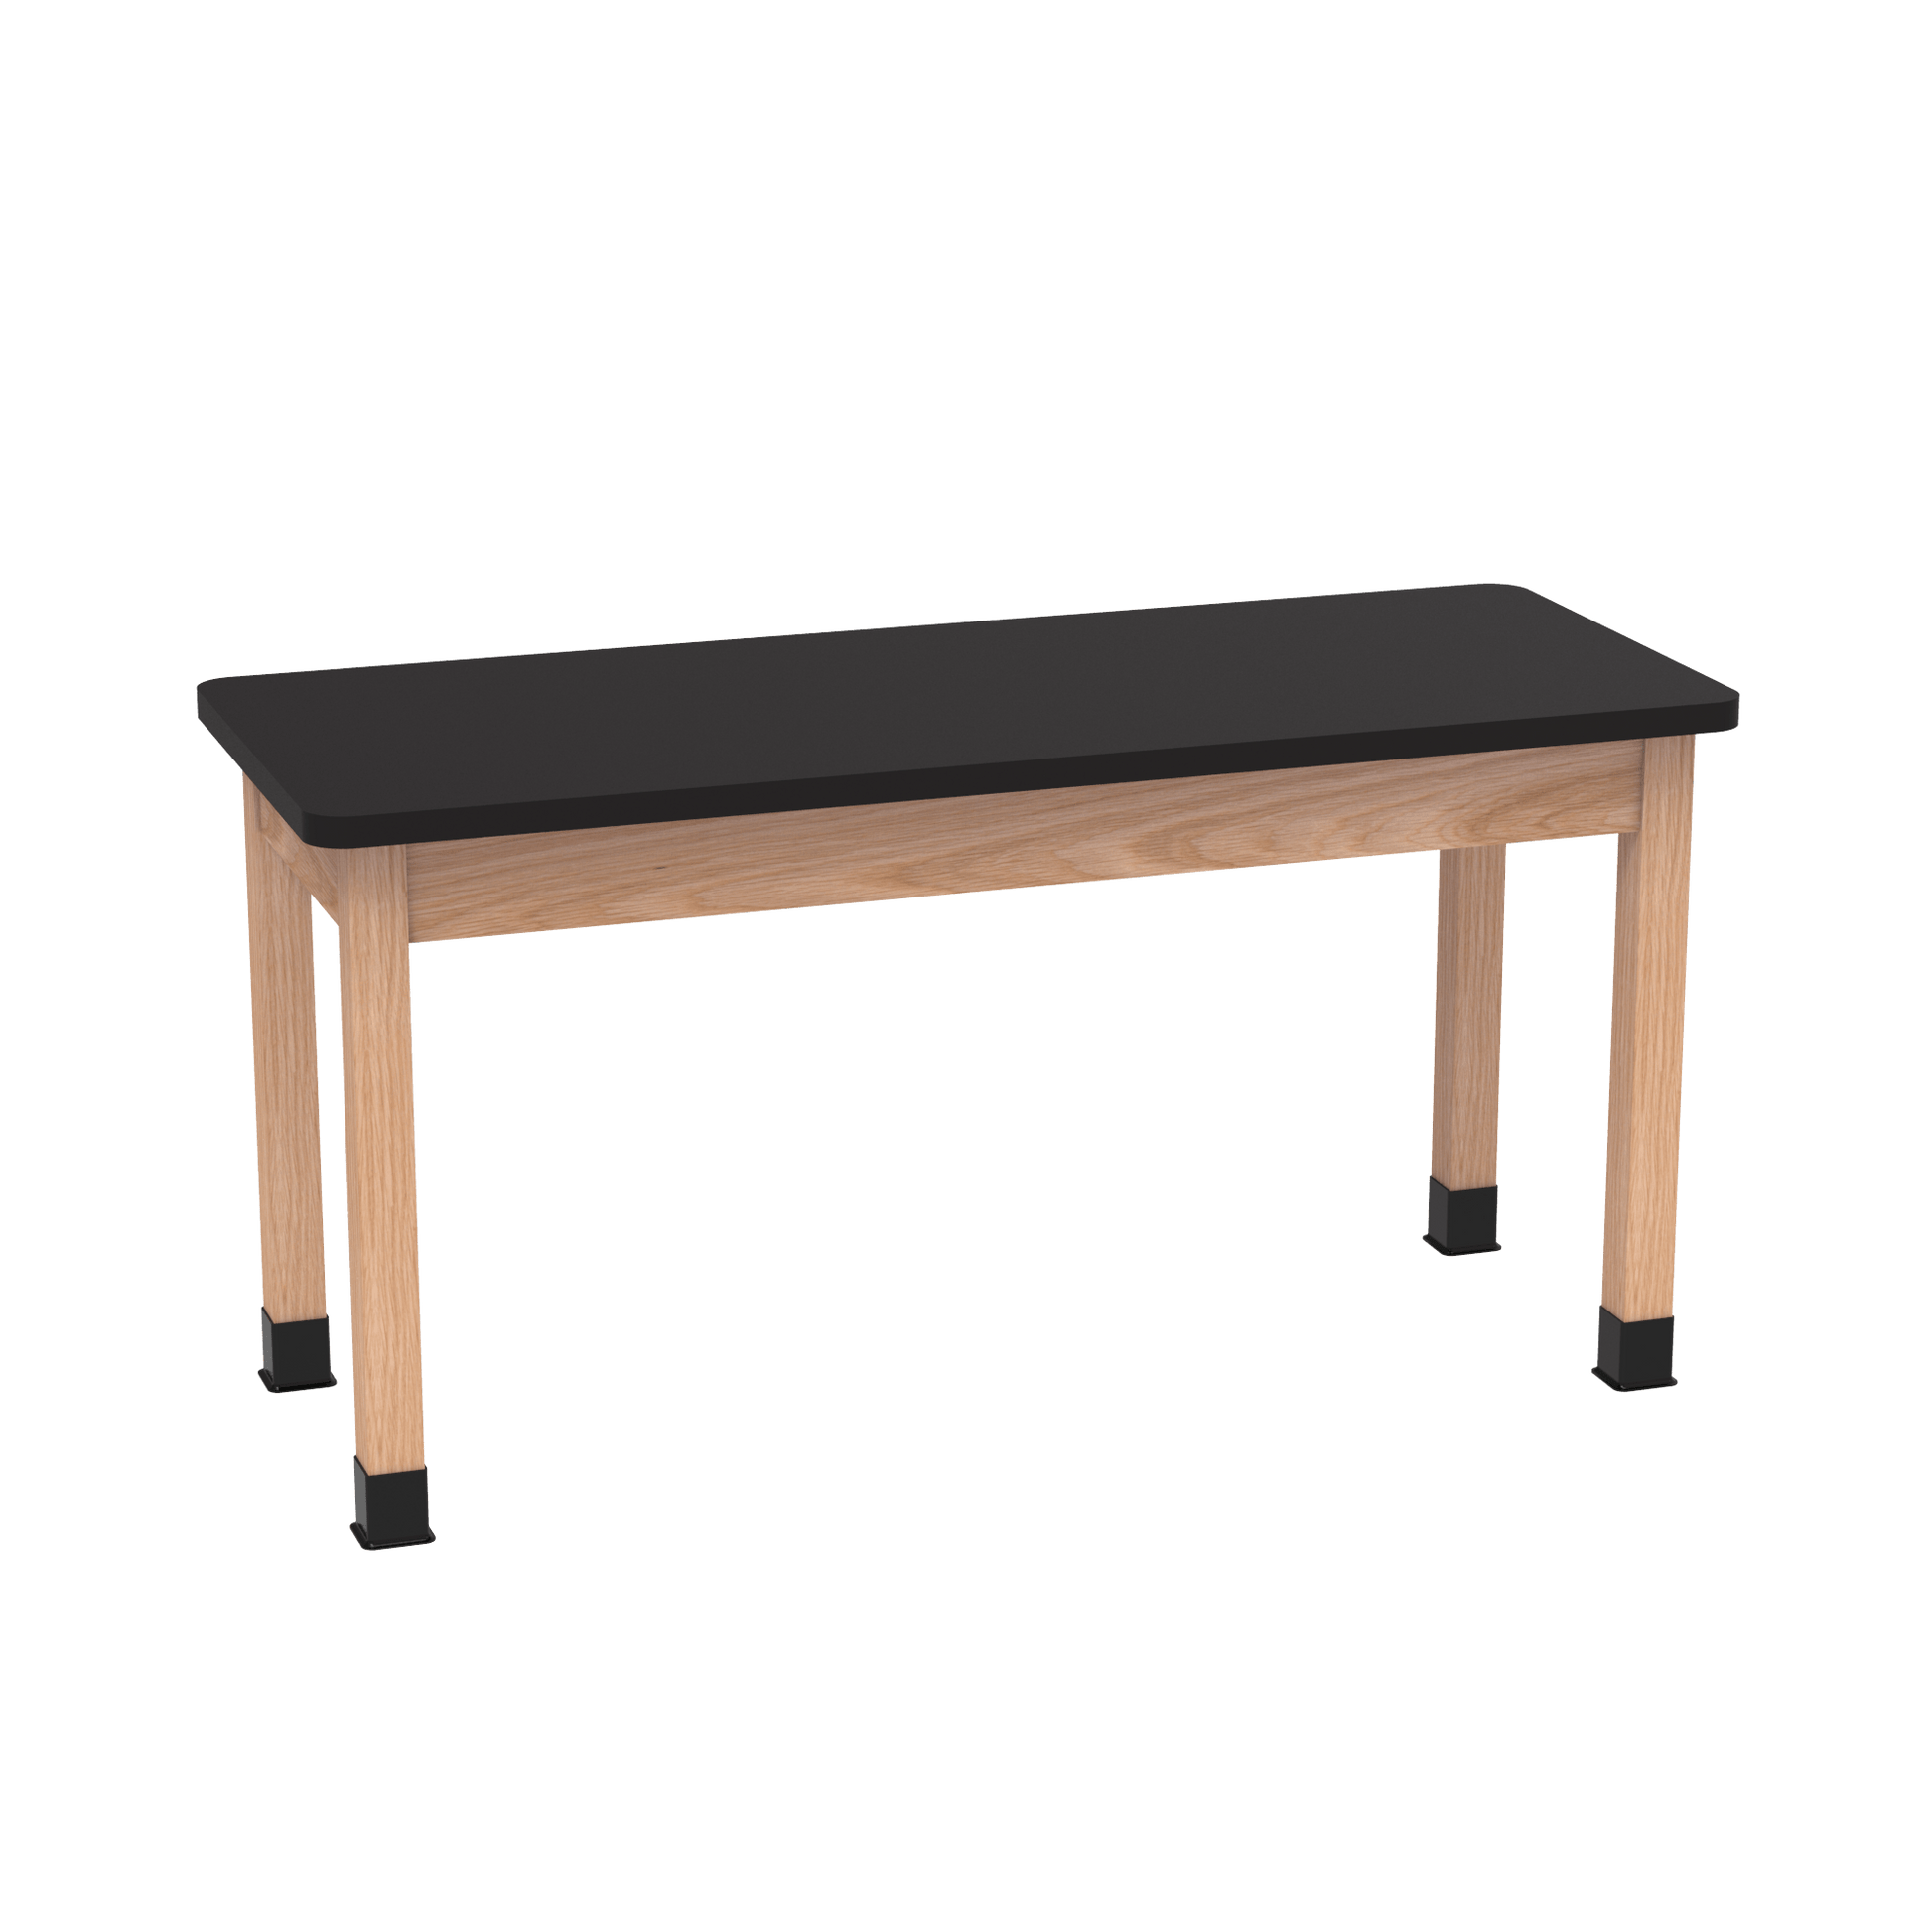 Diversified Woodcrafts Science Table - Plain Apron - 54" W x 24" D - Solid Wood Frame and Adjustable Glides - SchoolOutlet